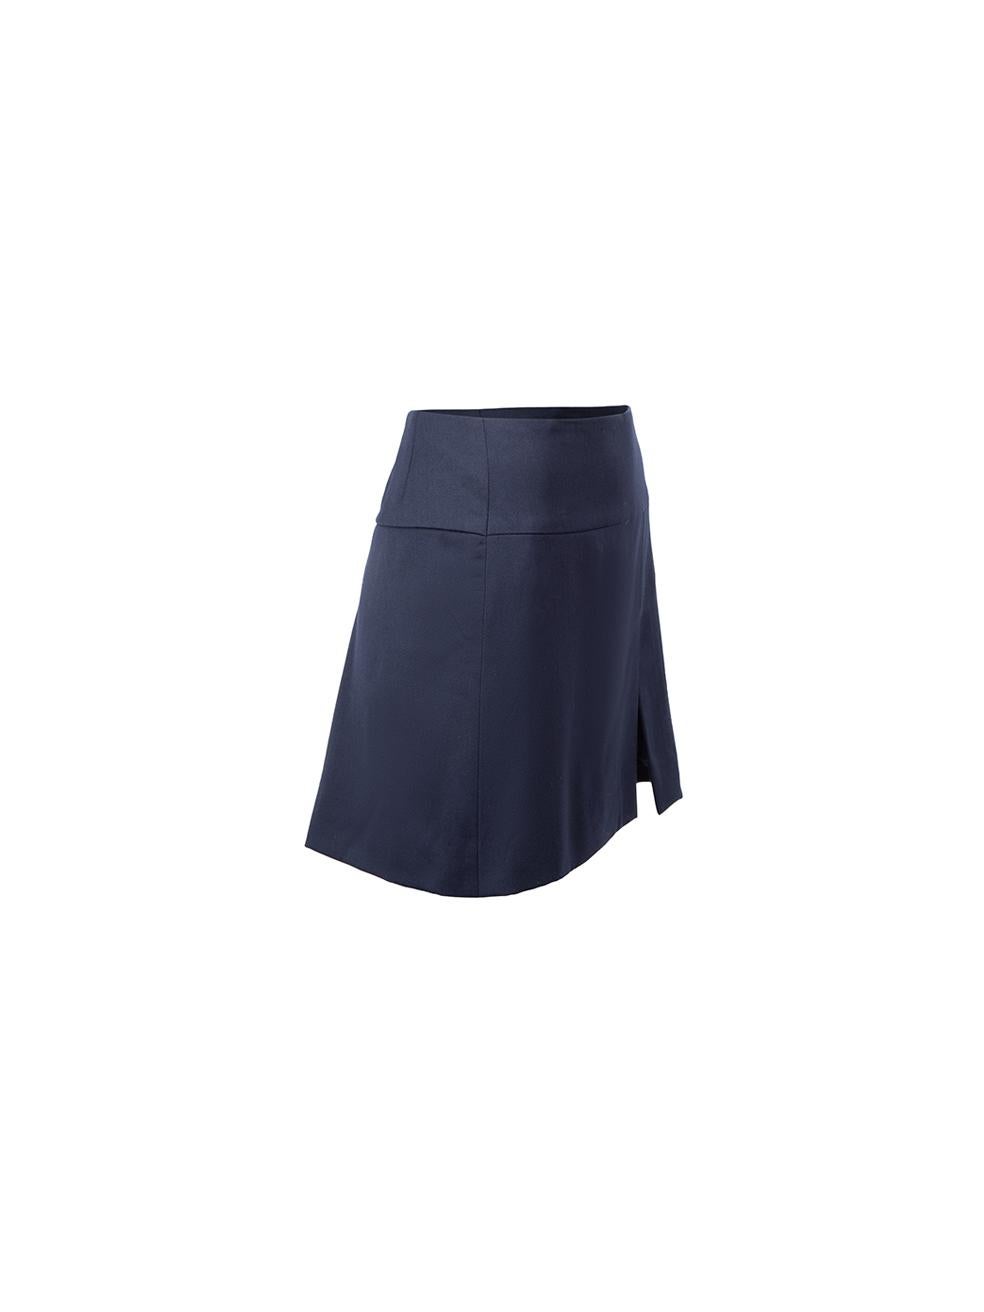 CONDITION is Never Worn. No visible wear to skirt is evident on this used Sanne designer sample item. 
 
 Details
  Designer sample item
 Navy
 Wool
 Mini skirt
 Front slit
 Back zip closure
 
 
 Made in London
 
 Composition
 NO COMPOSITION LABEL